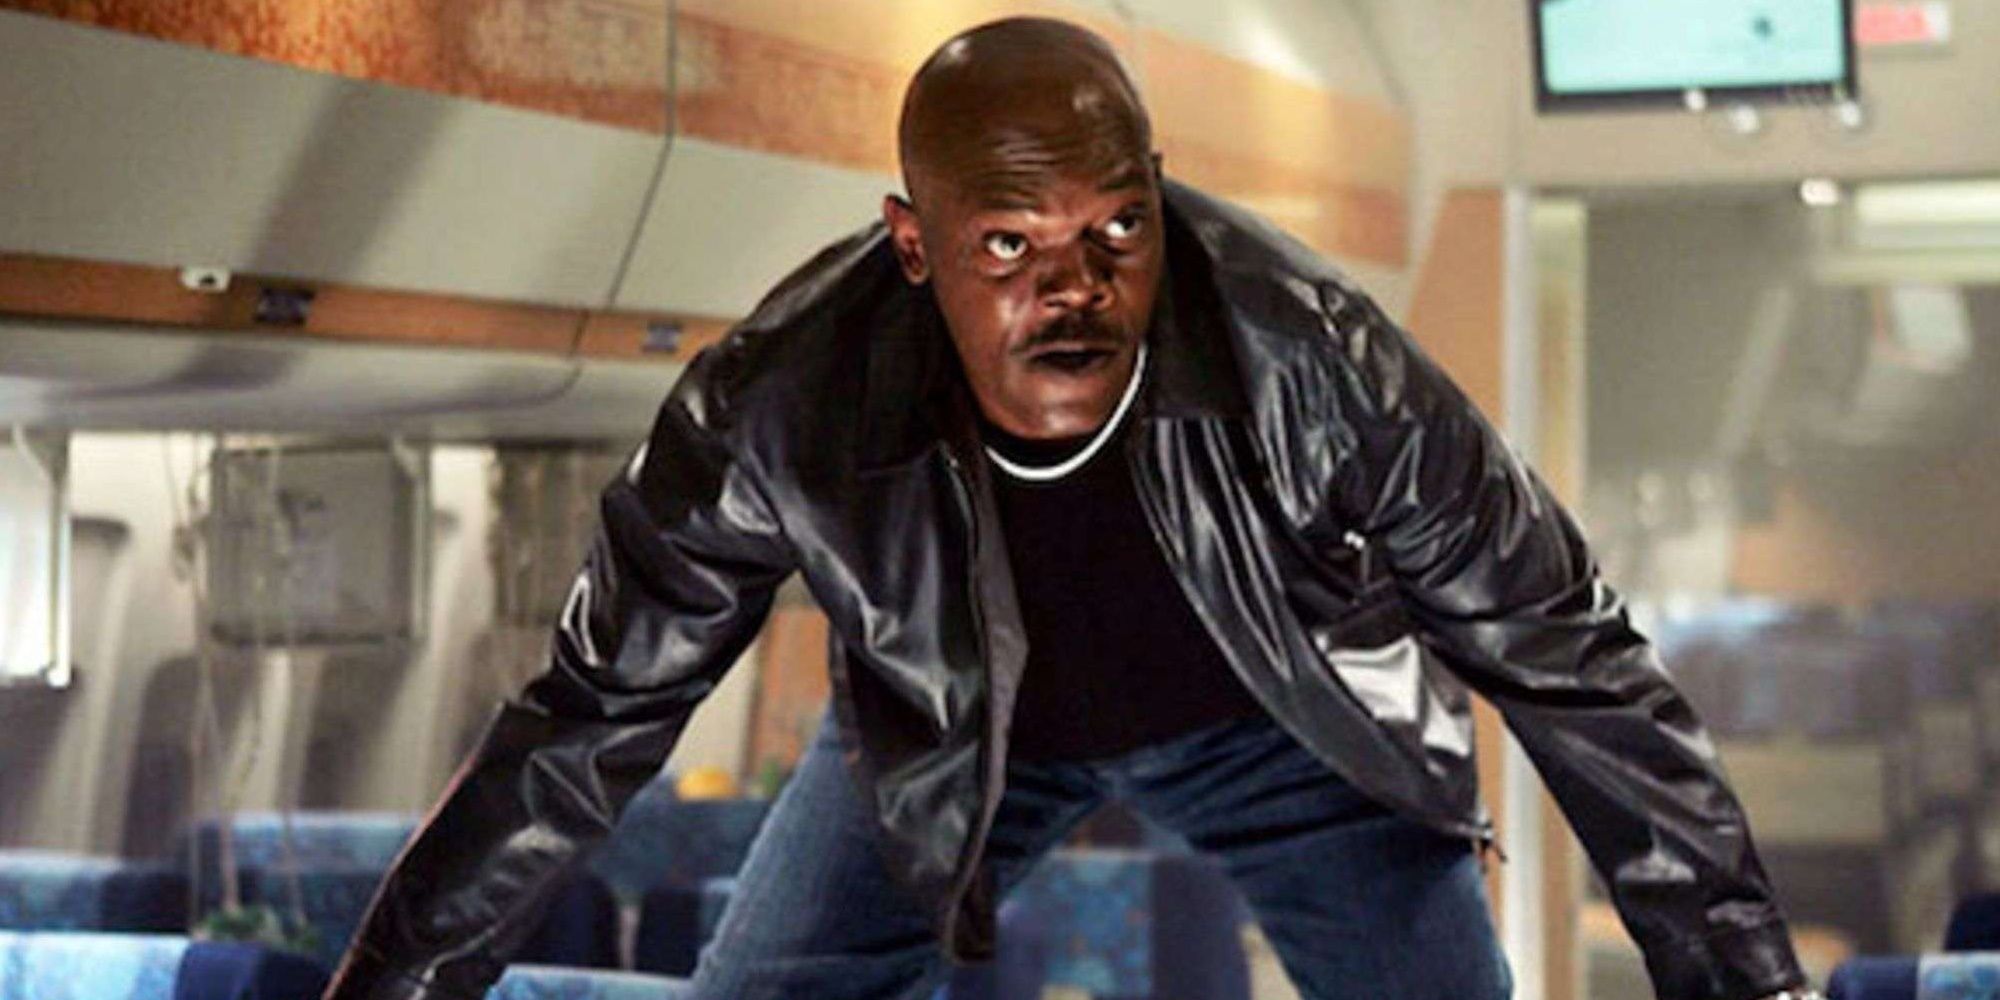 Samuel L. Jackson on top of some plane seats in Snakes On a Plane.